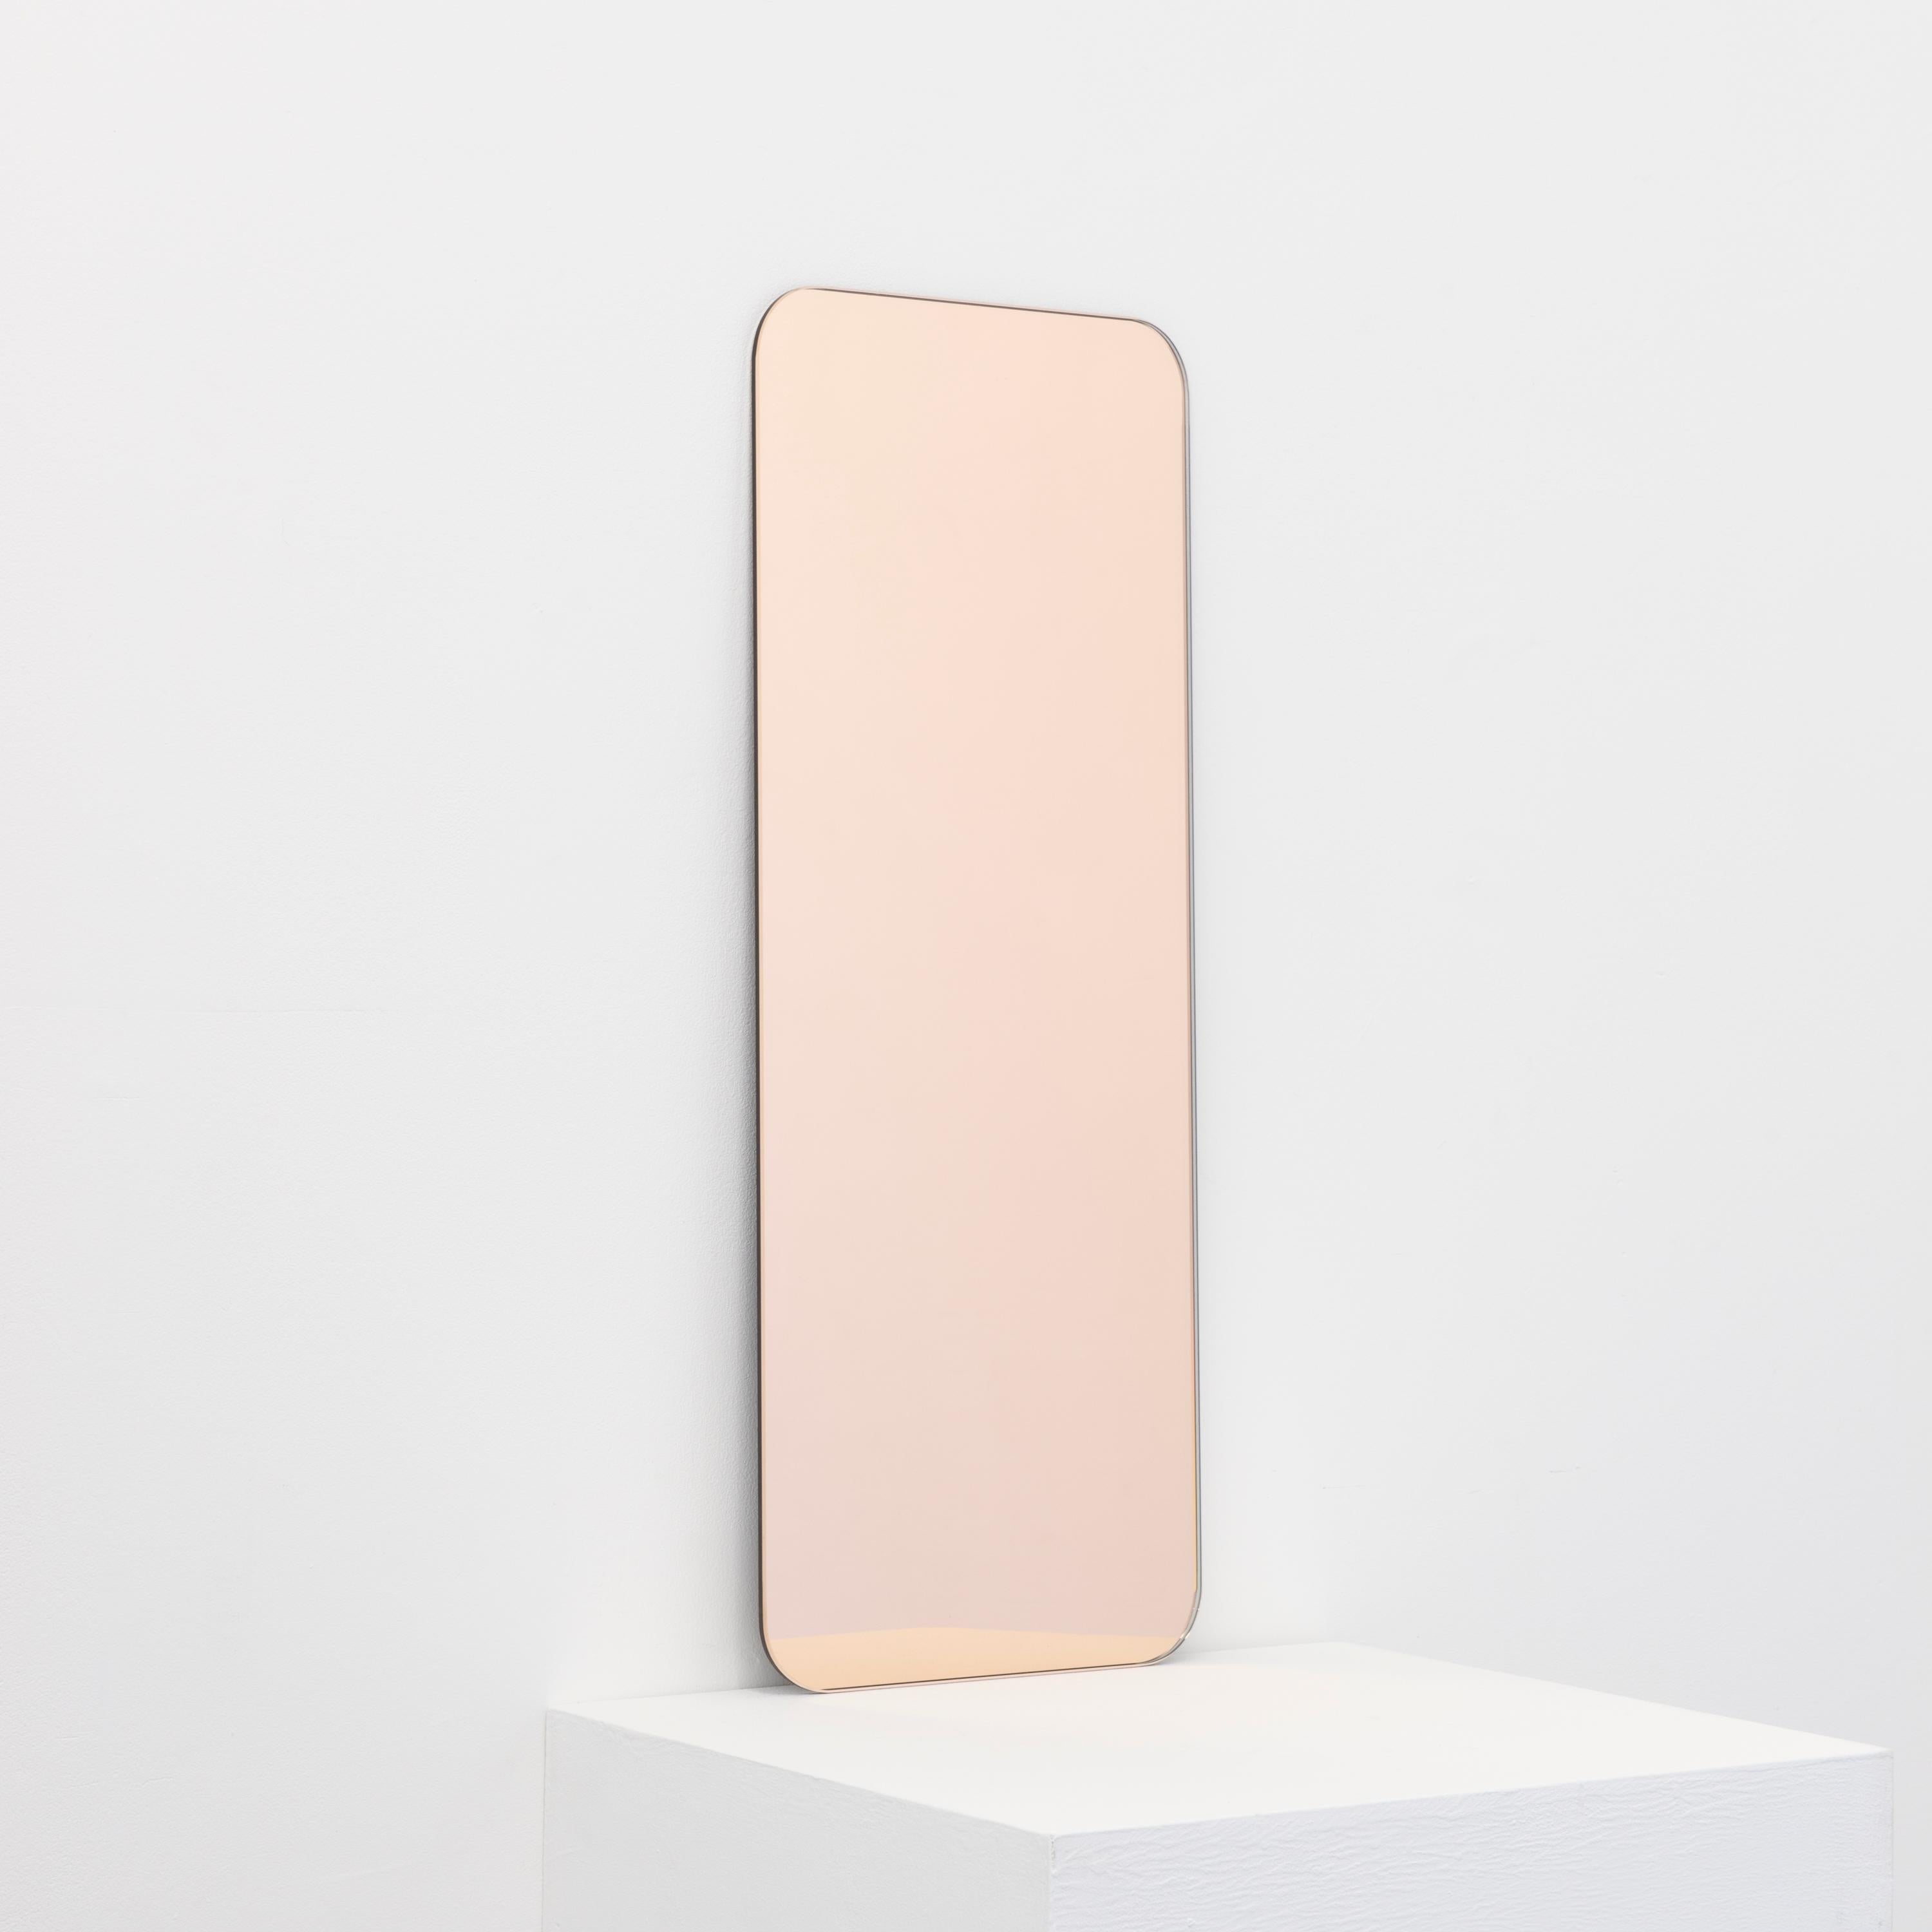 In Stock Quadris Rose Gold Rectangular Frameless Mirror, Small In New Condition For Sale In London, GB